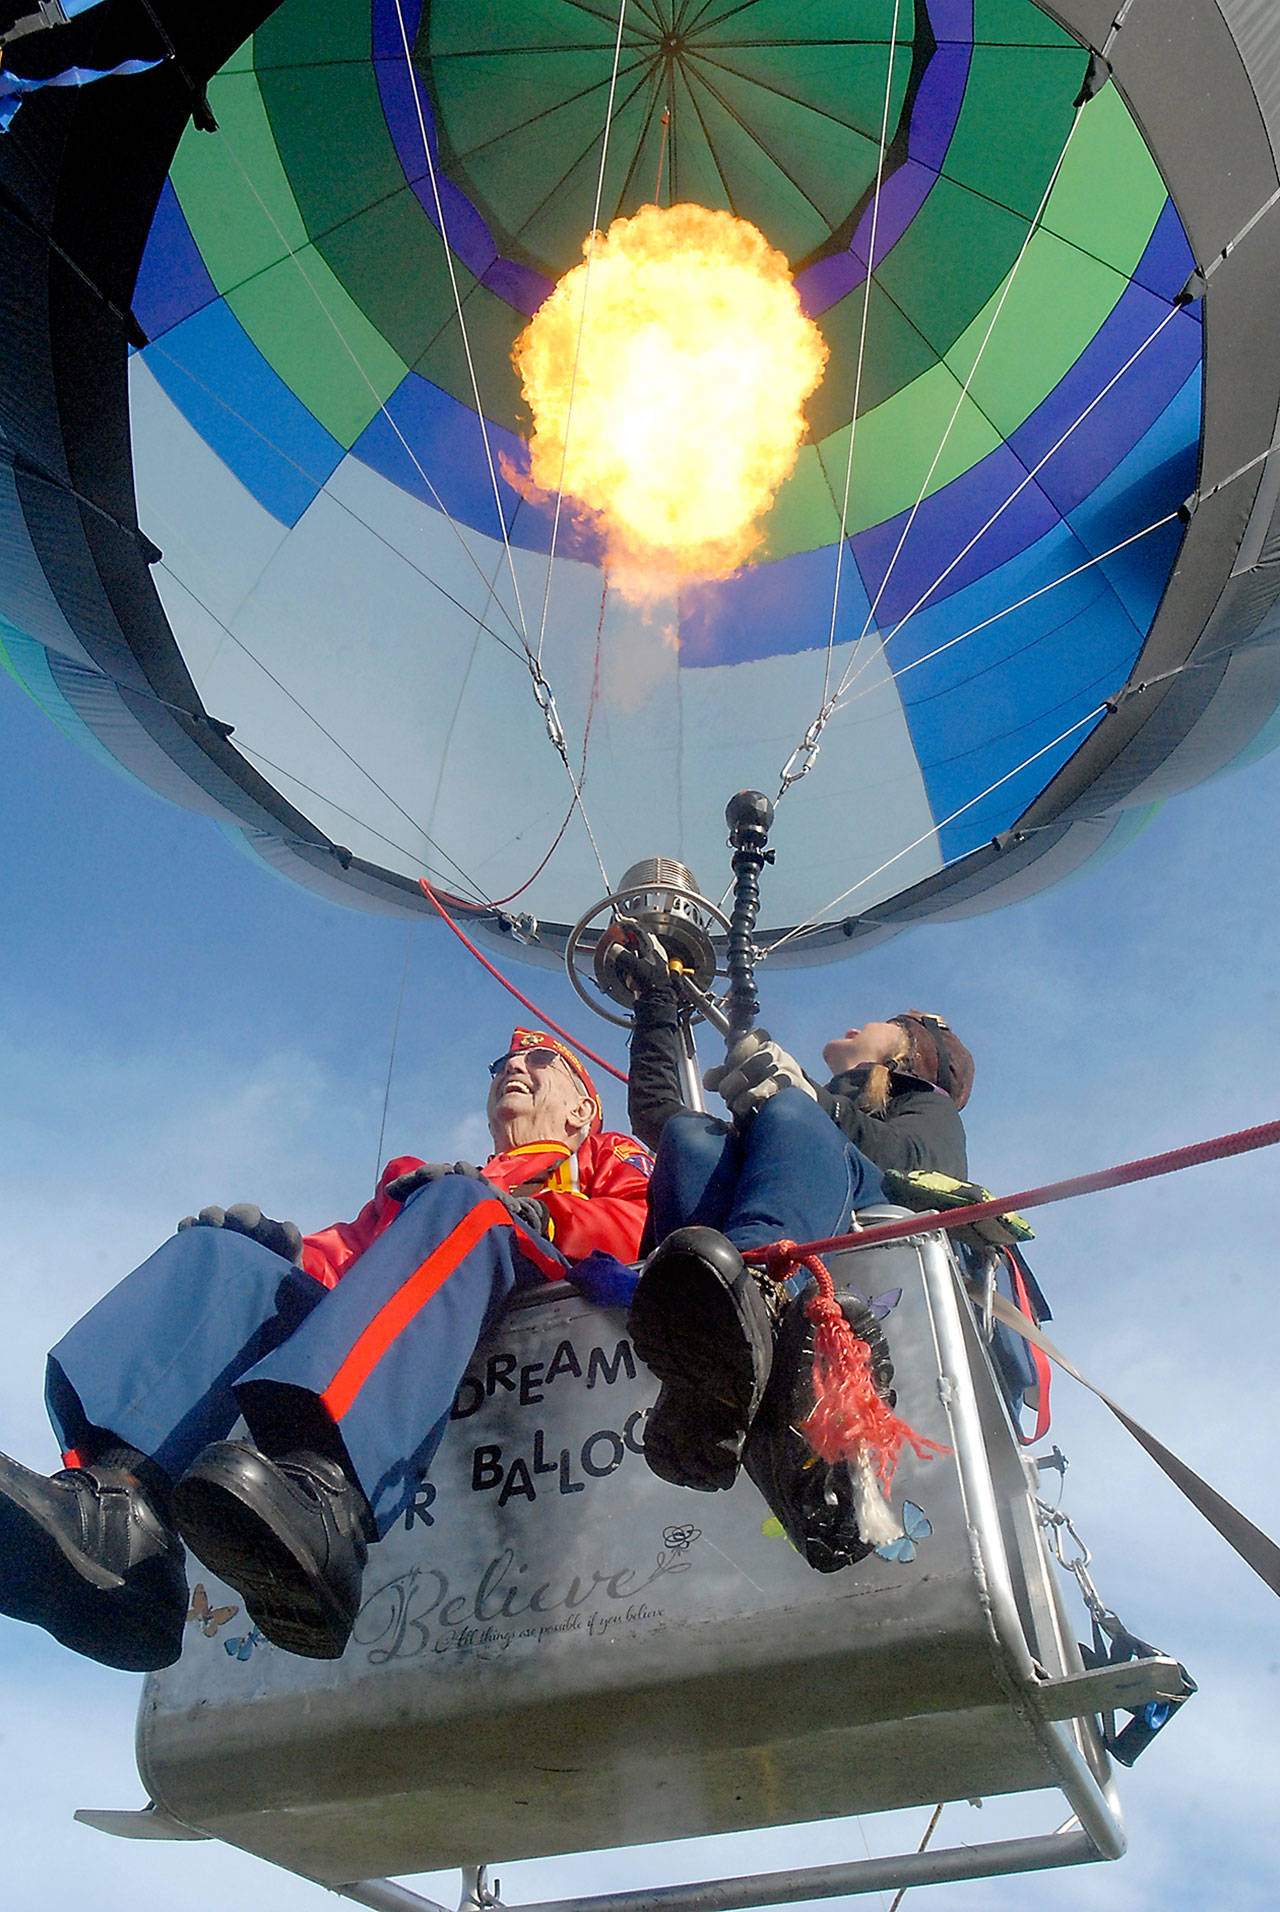 Port Angeles resident Tom McKeown, 95, a U.S. Marine Corps veteran of World War II, takes a tethered balloon ride with Capt. Crystal Stout, executive director of Dream Catcher Balloon, on Saturday at Sequim Valley Airport west of Sequim. (Keith Thorpe/Peninsula Daily News)